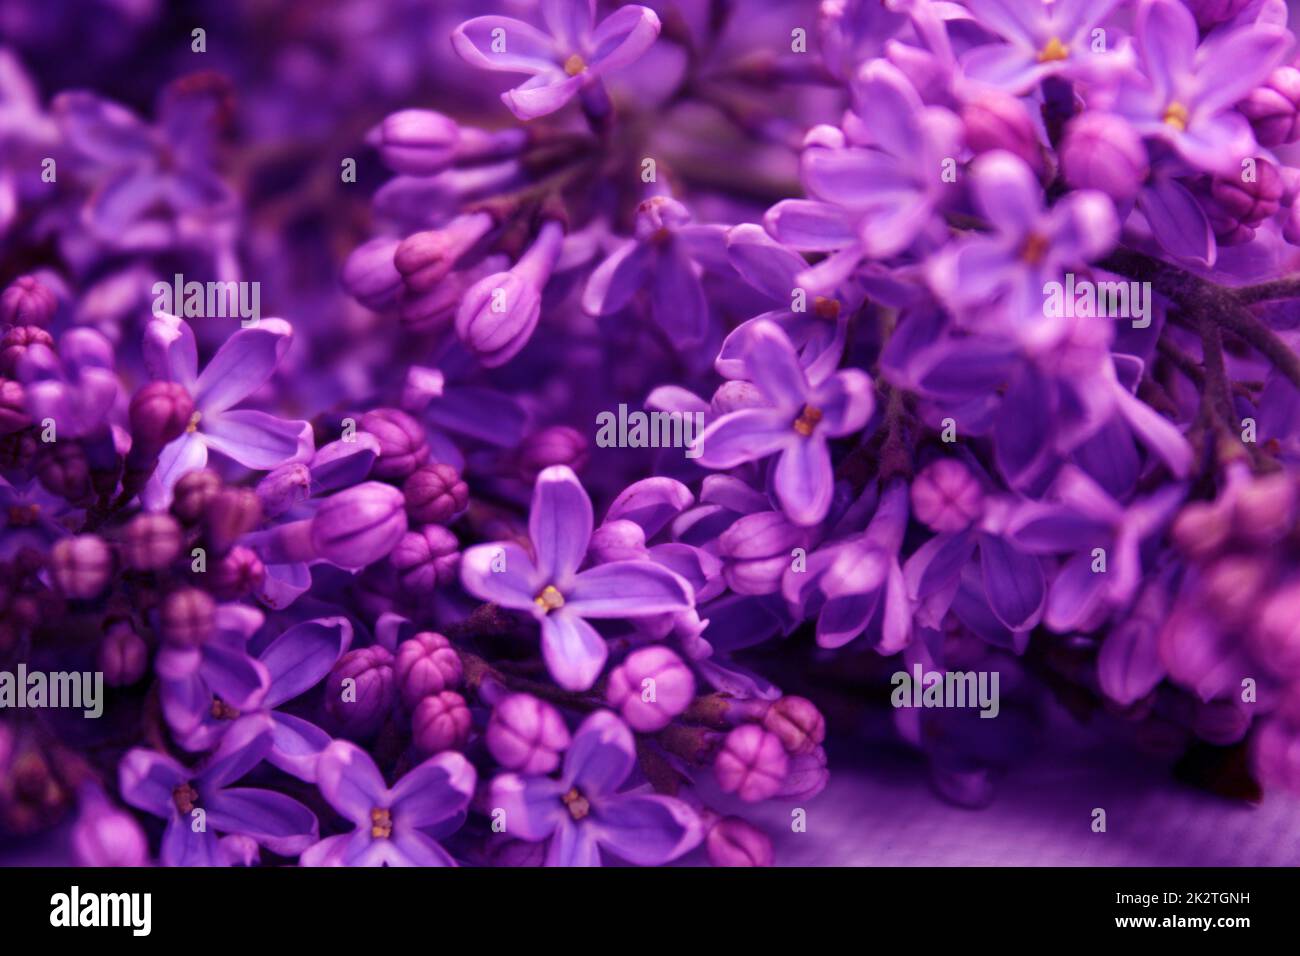 Lilac flowers in neon light. Stock Photo